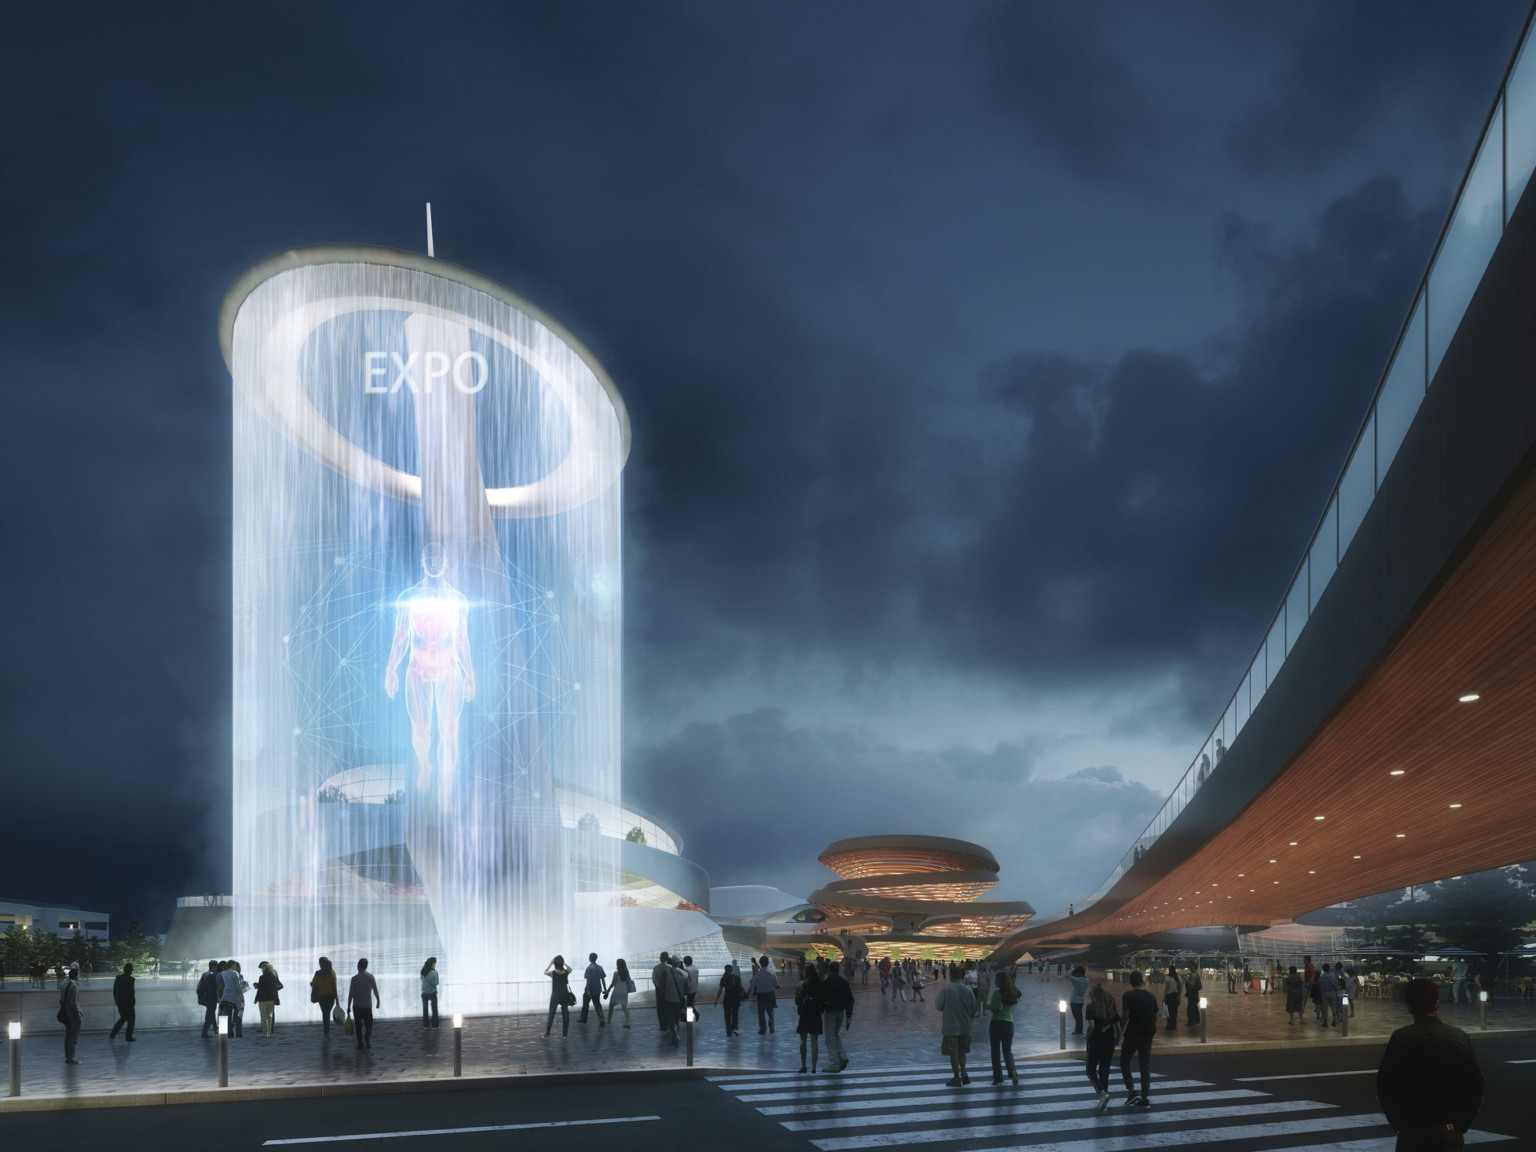 Multi-story rounded water feature with Expo 2027 sign along pathway